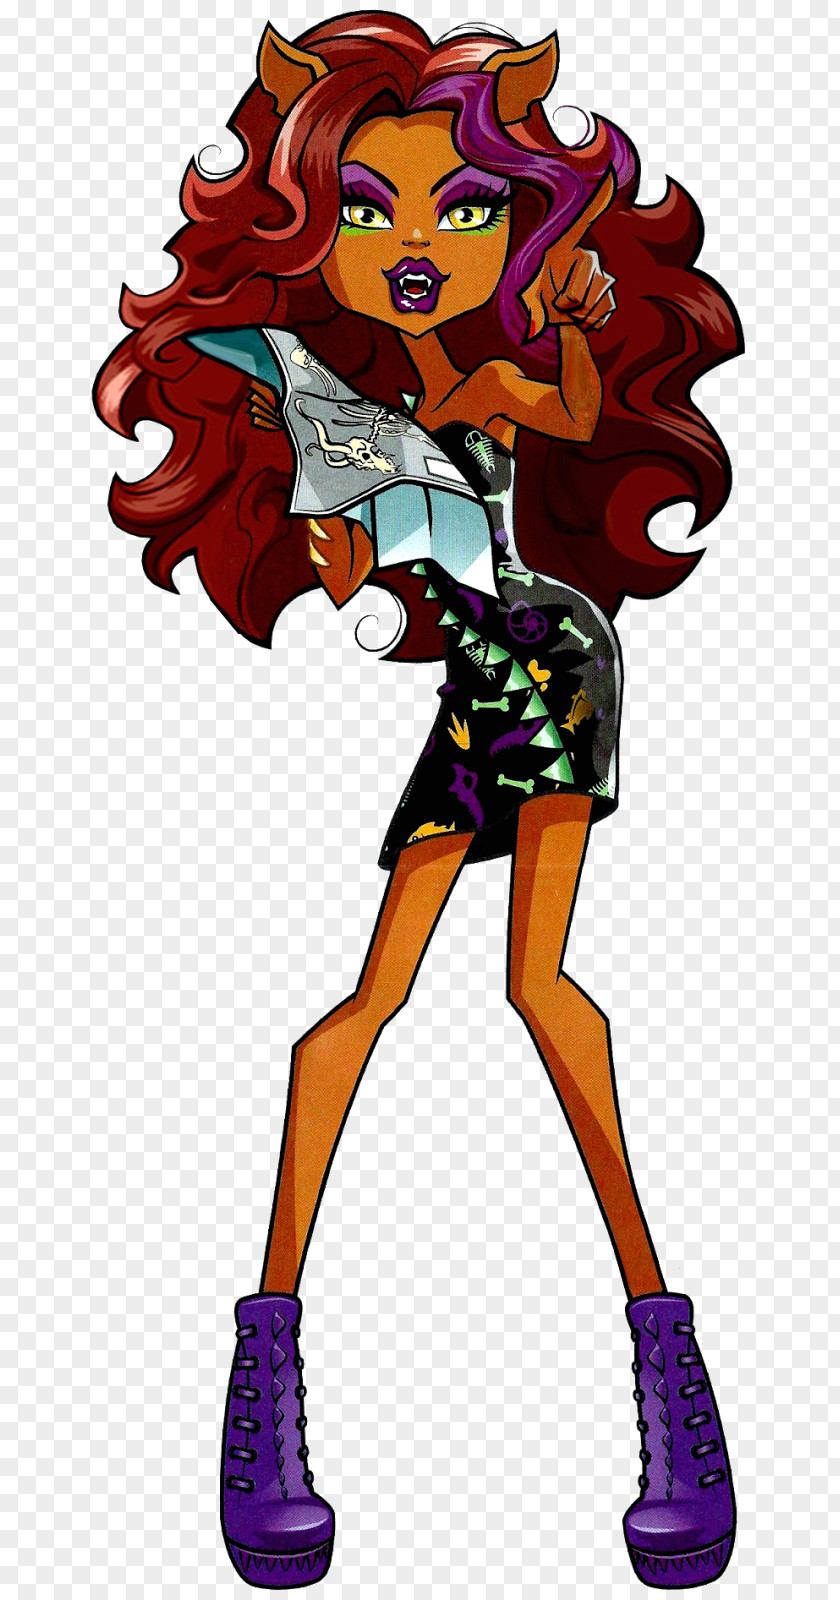 Good Evening Gray Wolf Doll Monster High Toy PNG